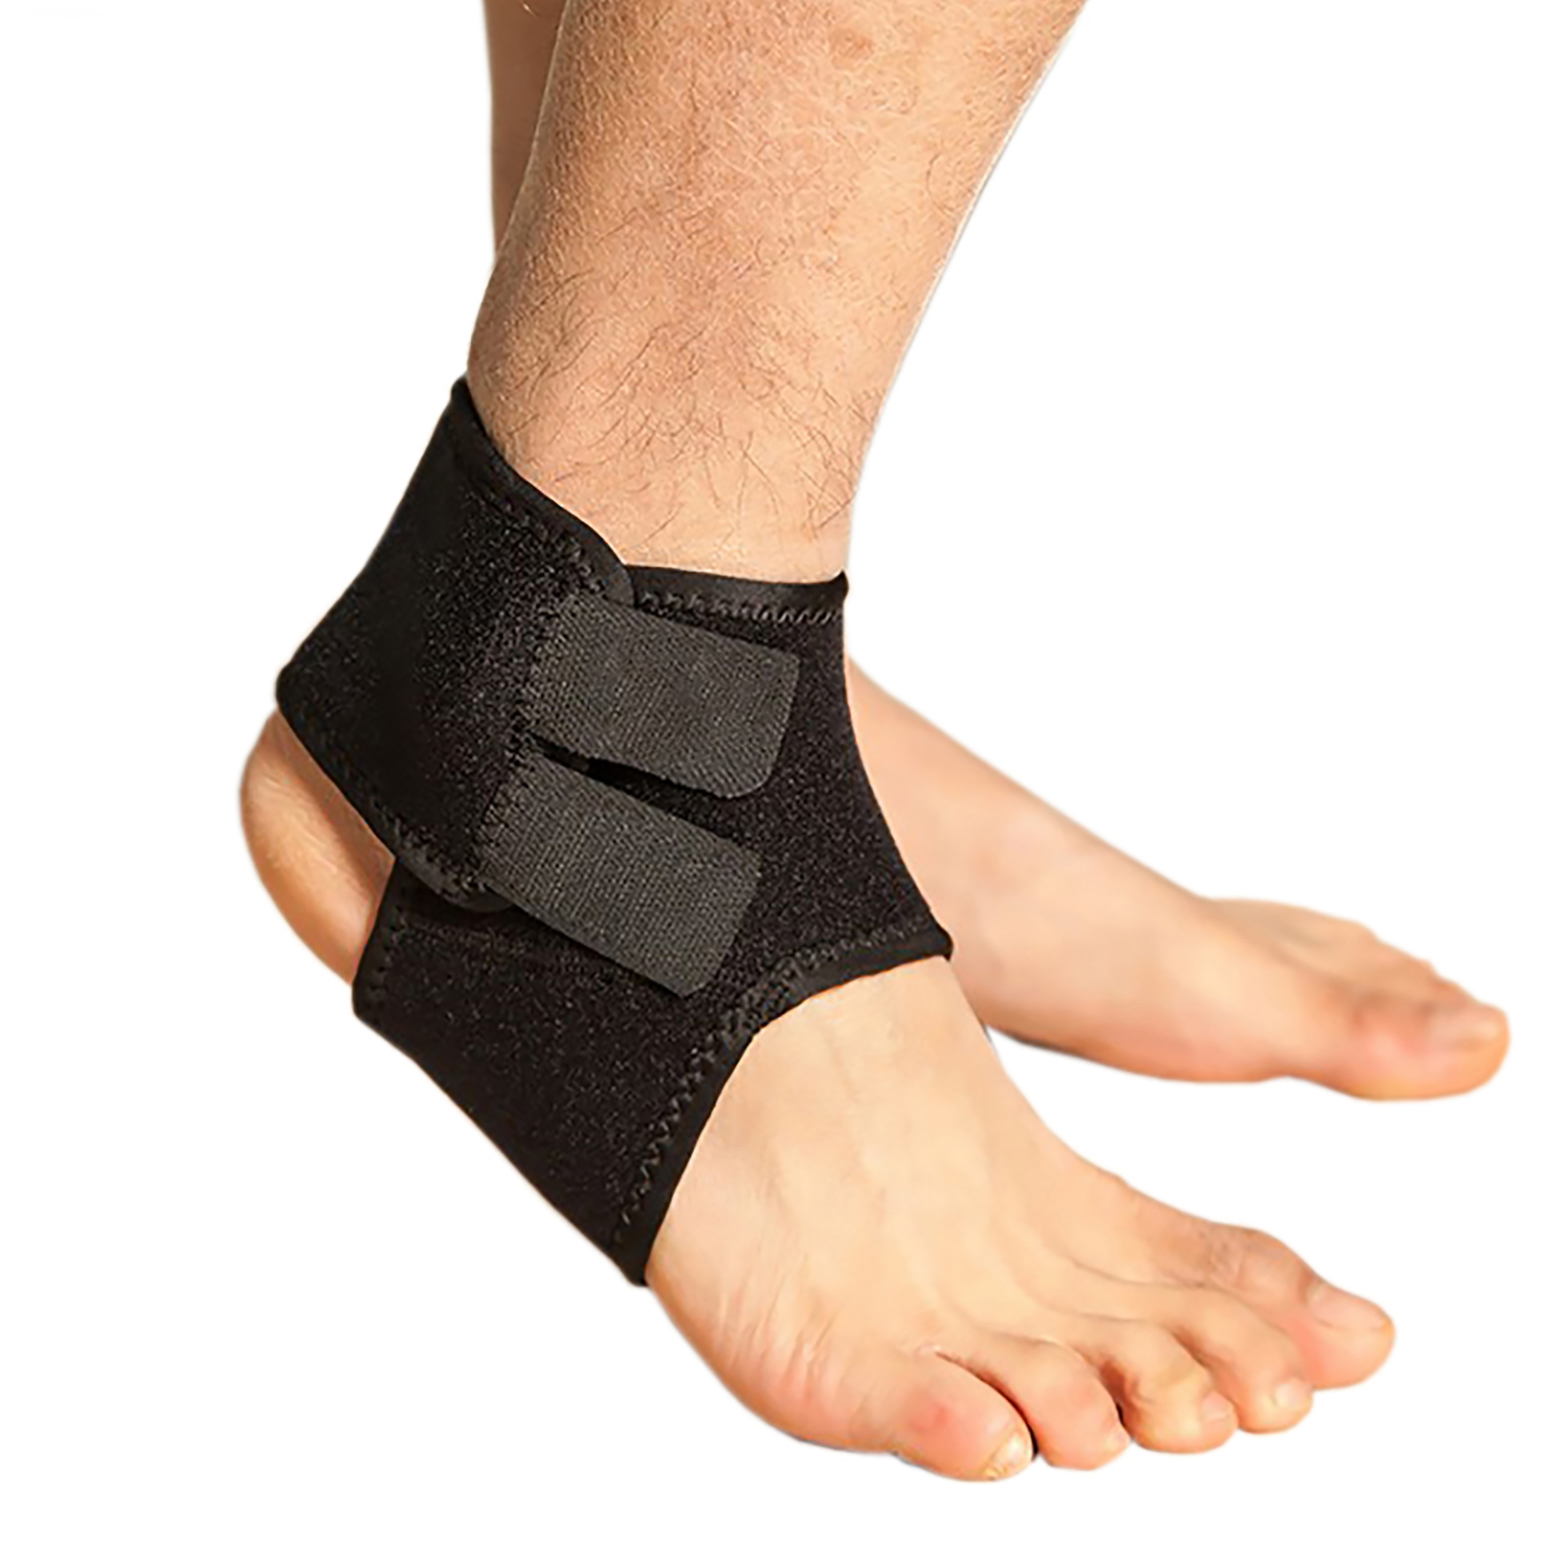 Double compression ankle strap